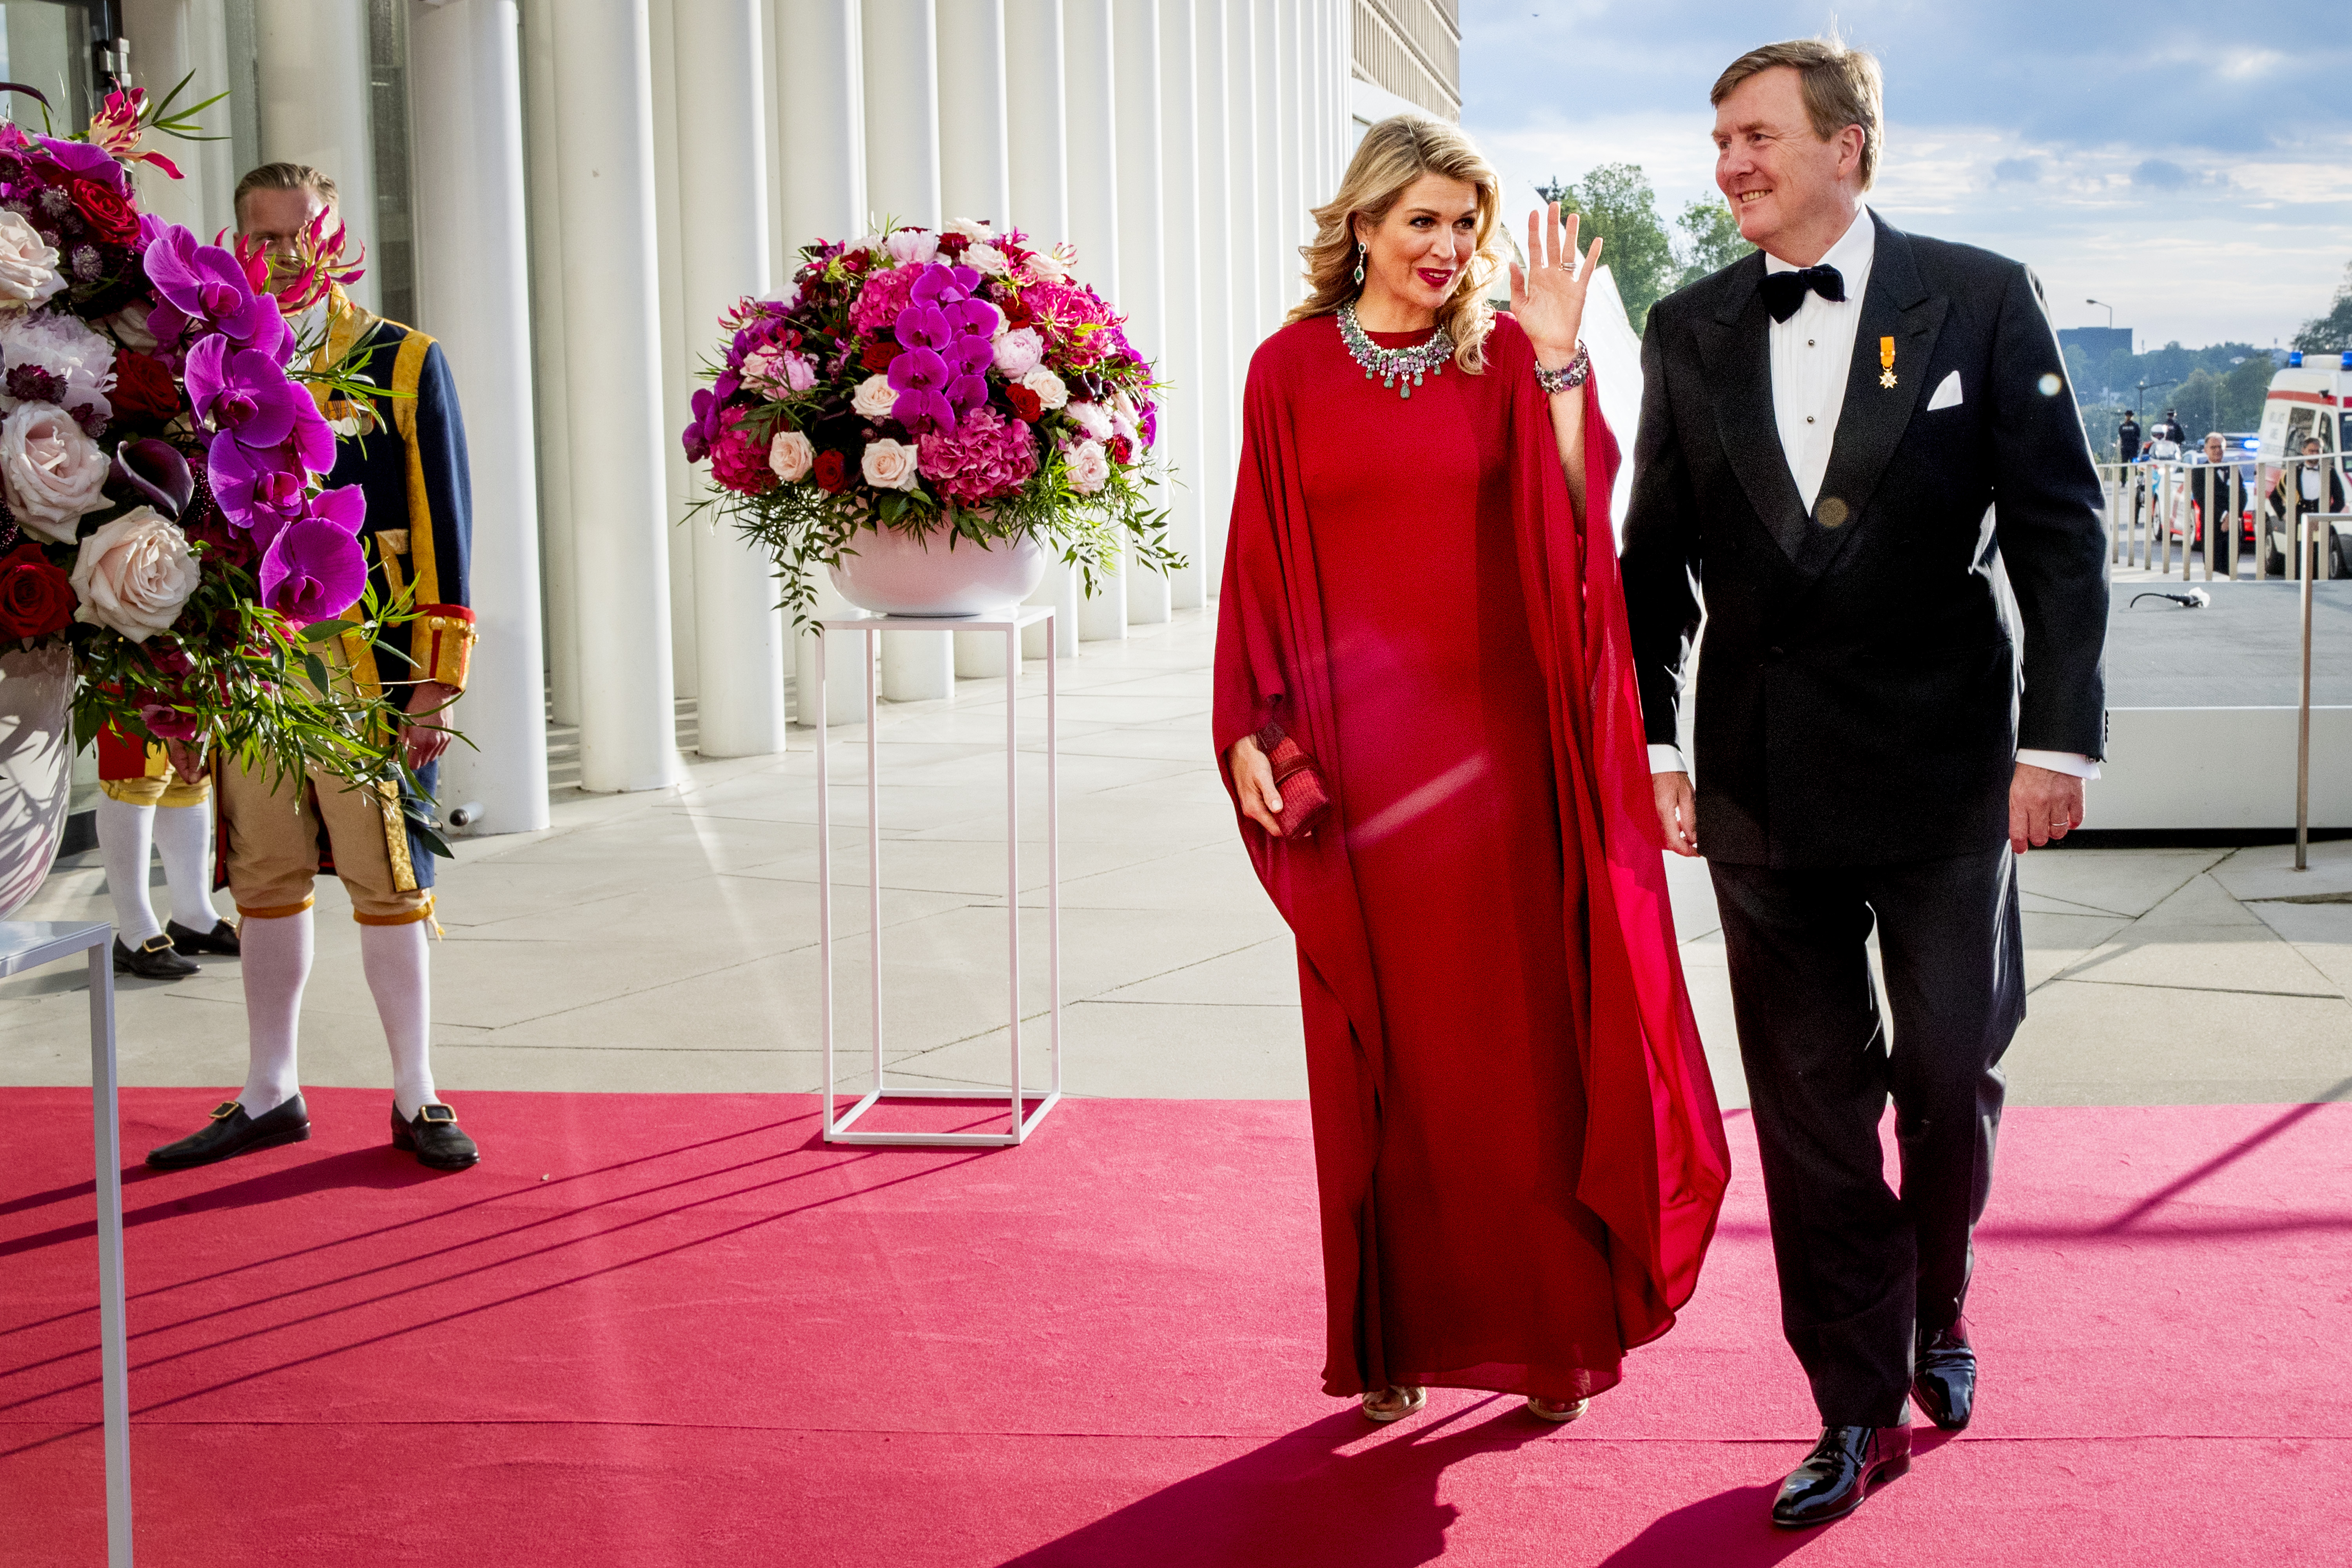 King And Queen Of The Netherlands Visit Luxembourg : Day Two